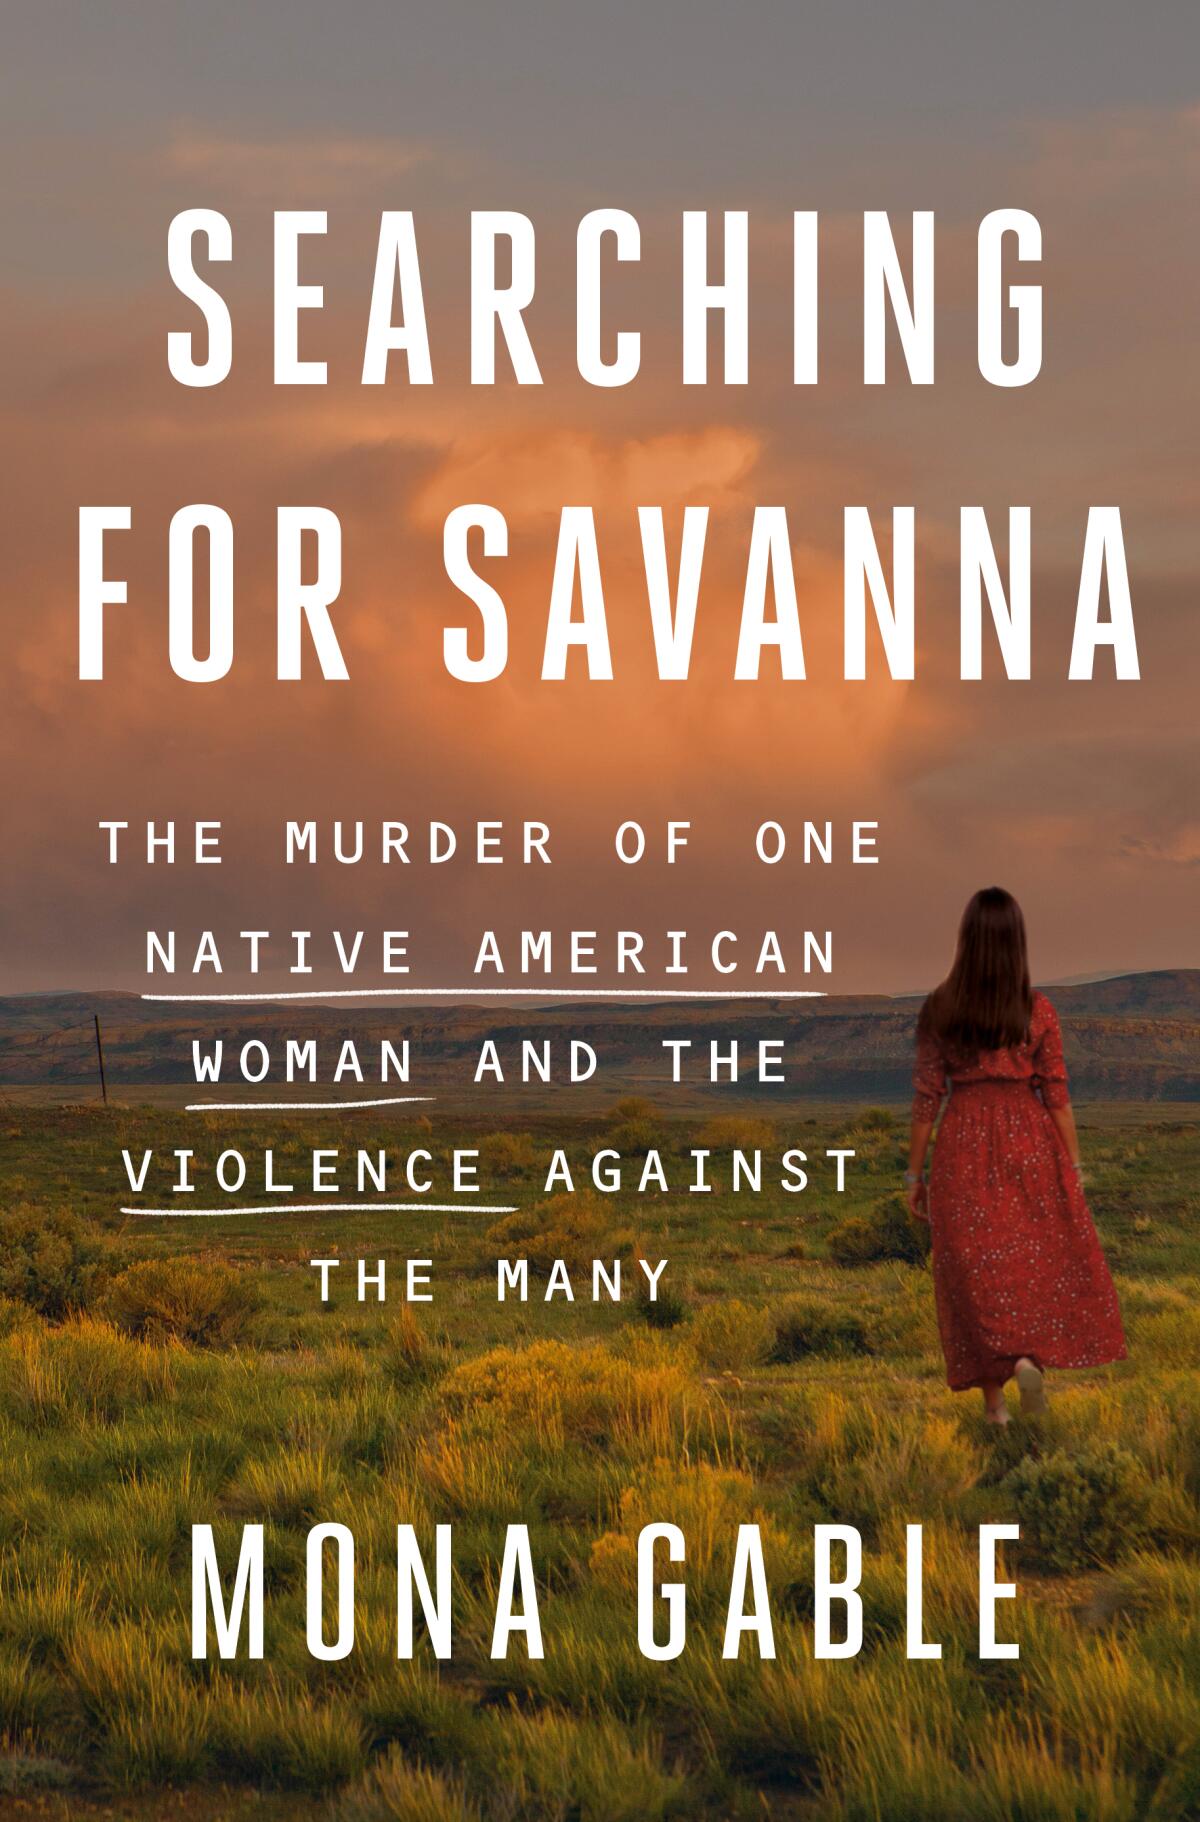 "Searching for Savanna," by Mona Gable